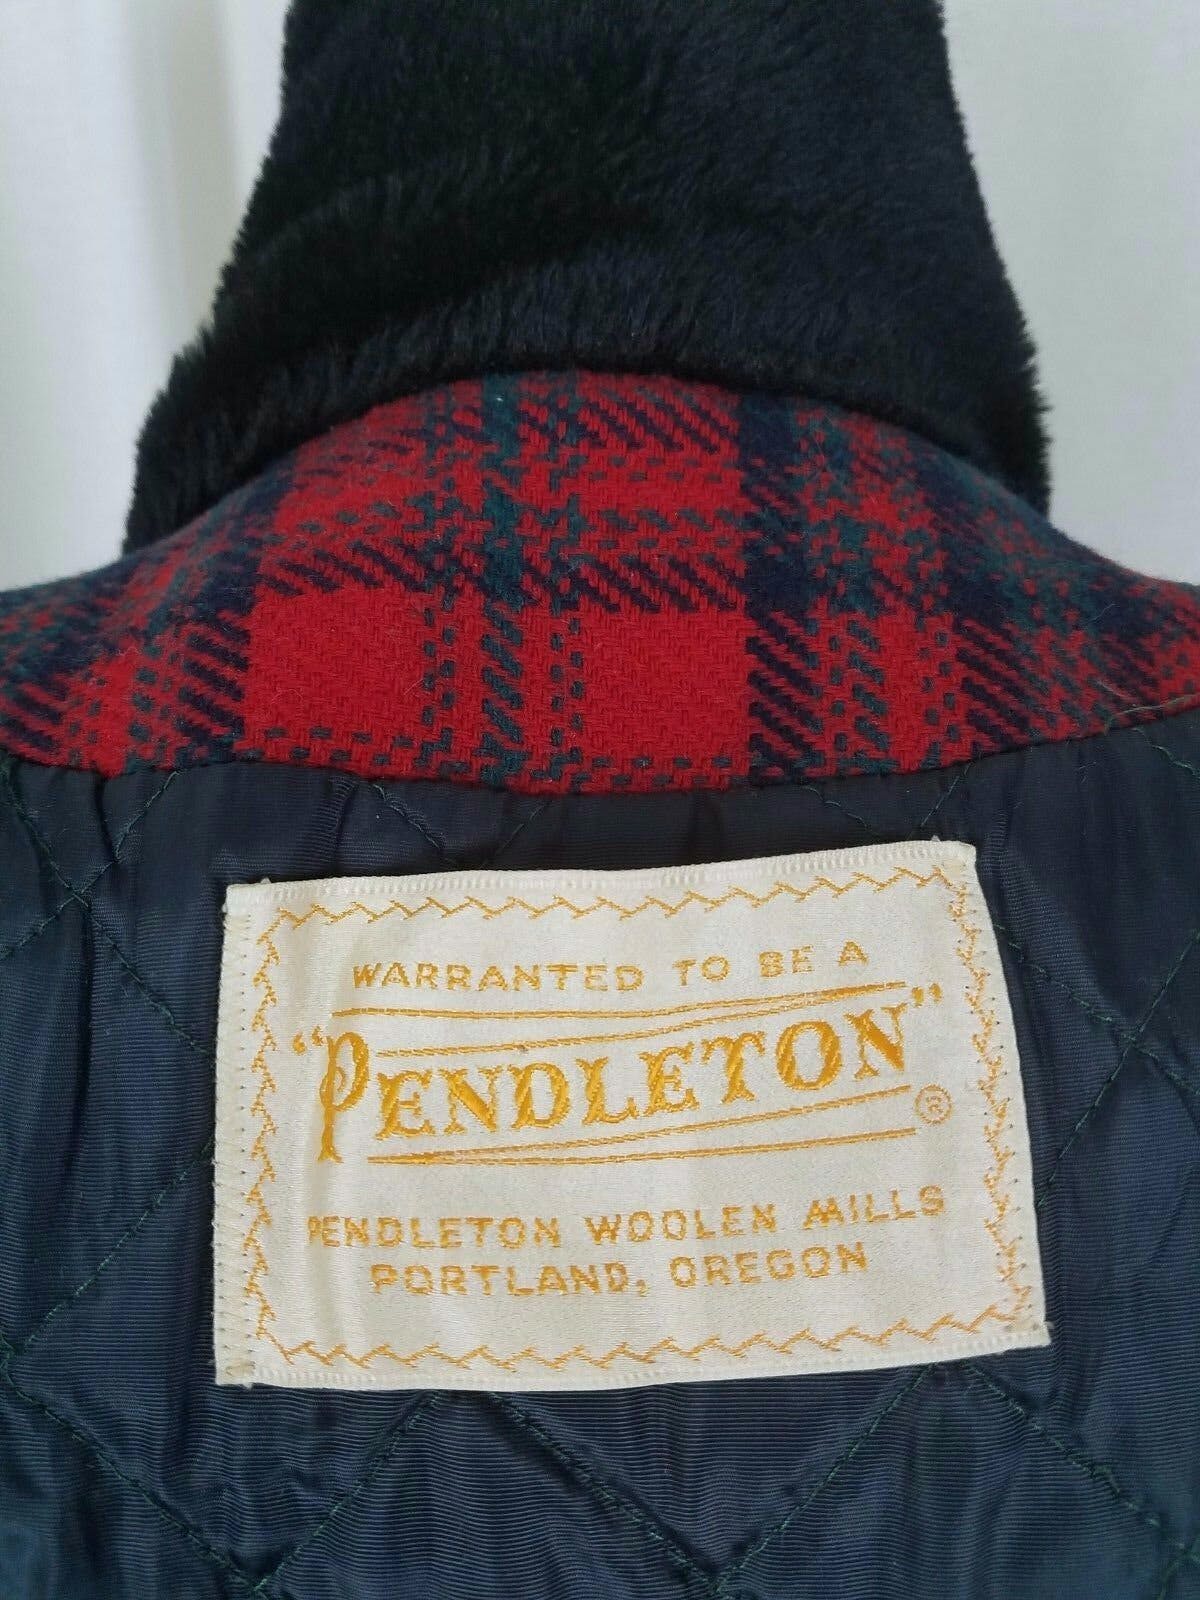 Vintage Black and Red Plaid Quilted Wool Coat by Pendleton | Shop THRILLING